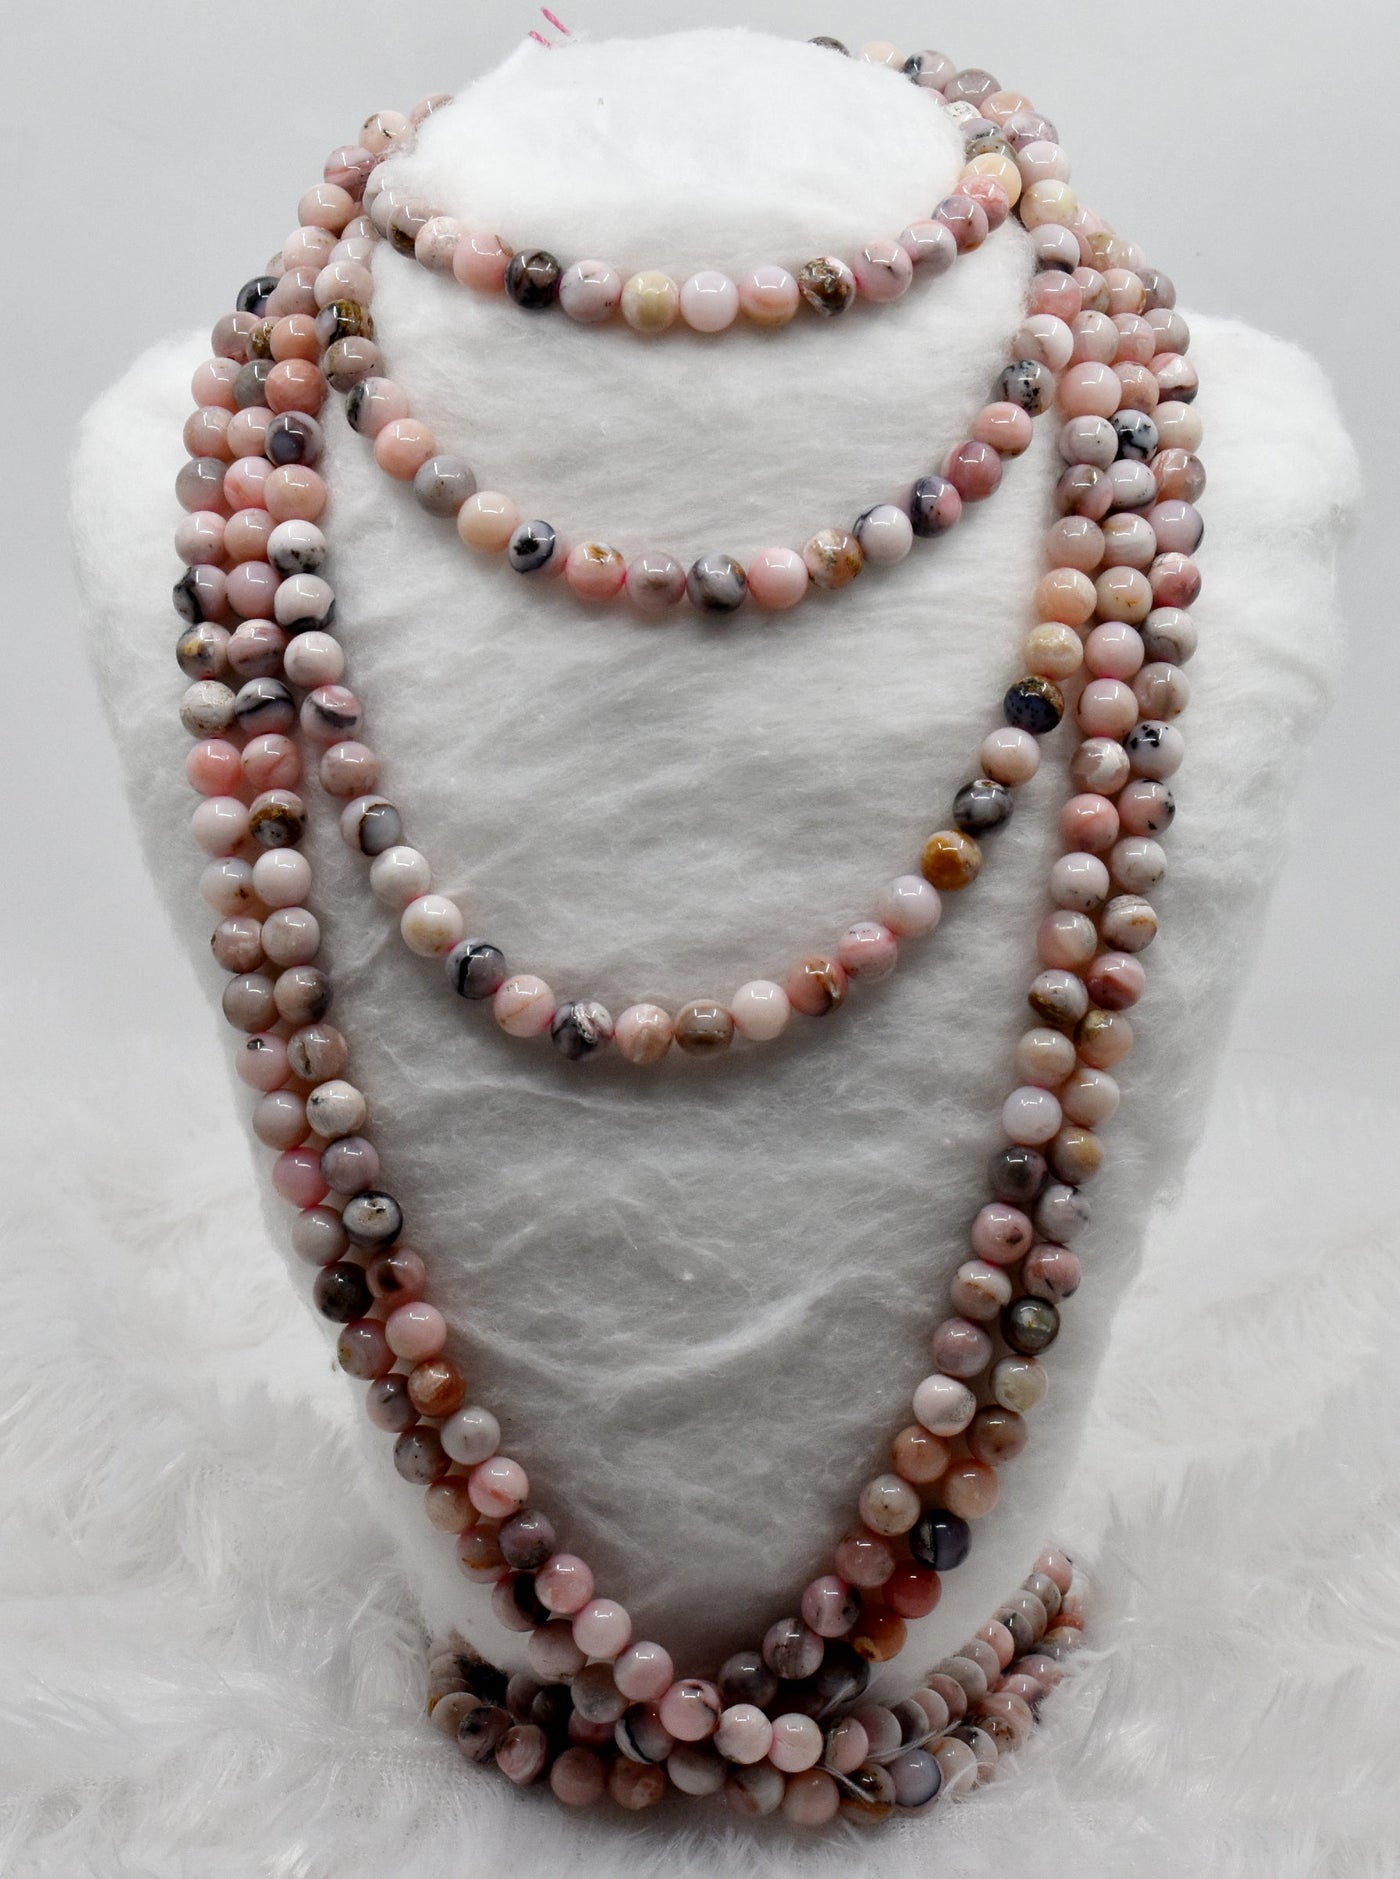 Pink Opal Beads, Natural Round Crystal Beads 6mm to 10mm